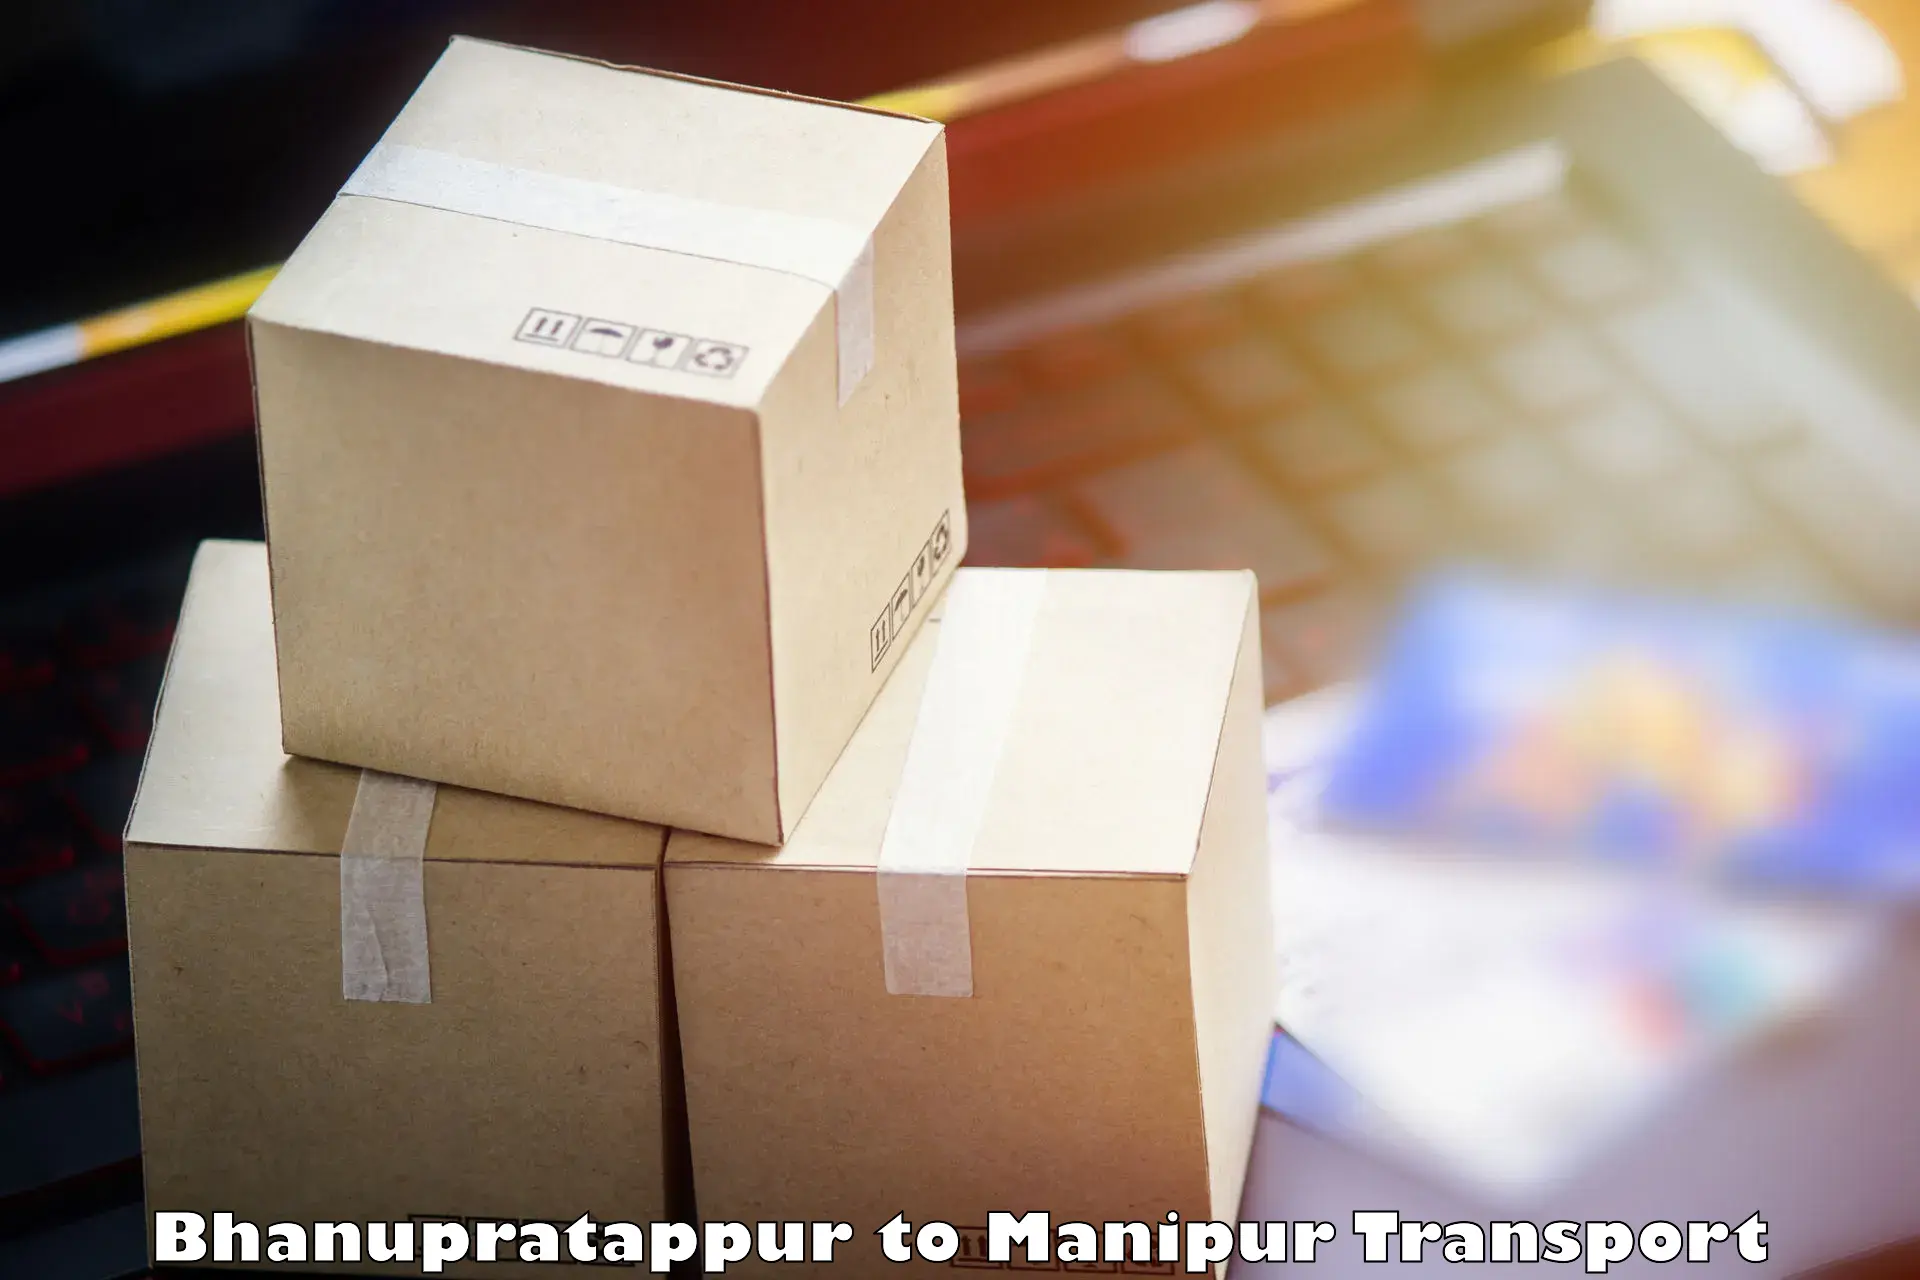 Goods delivery service Bhanupratappur to Imphal